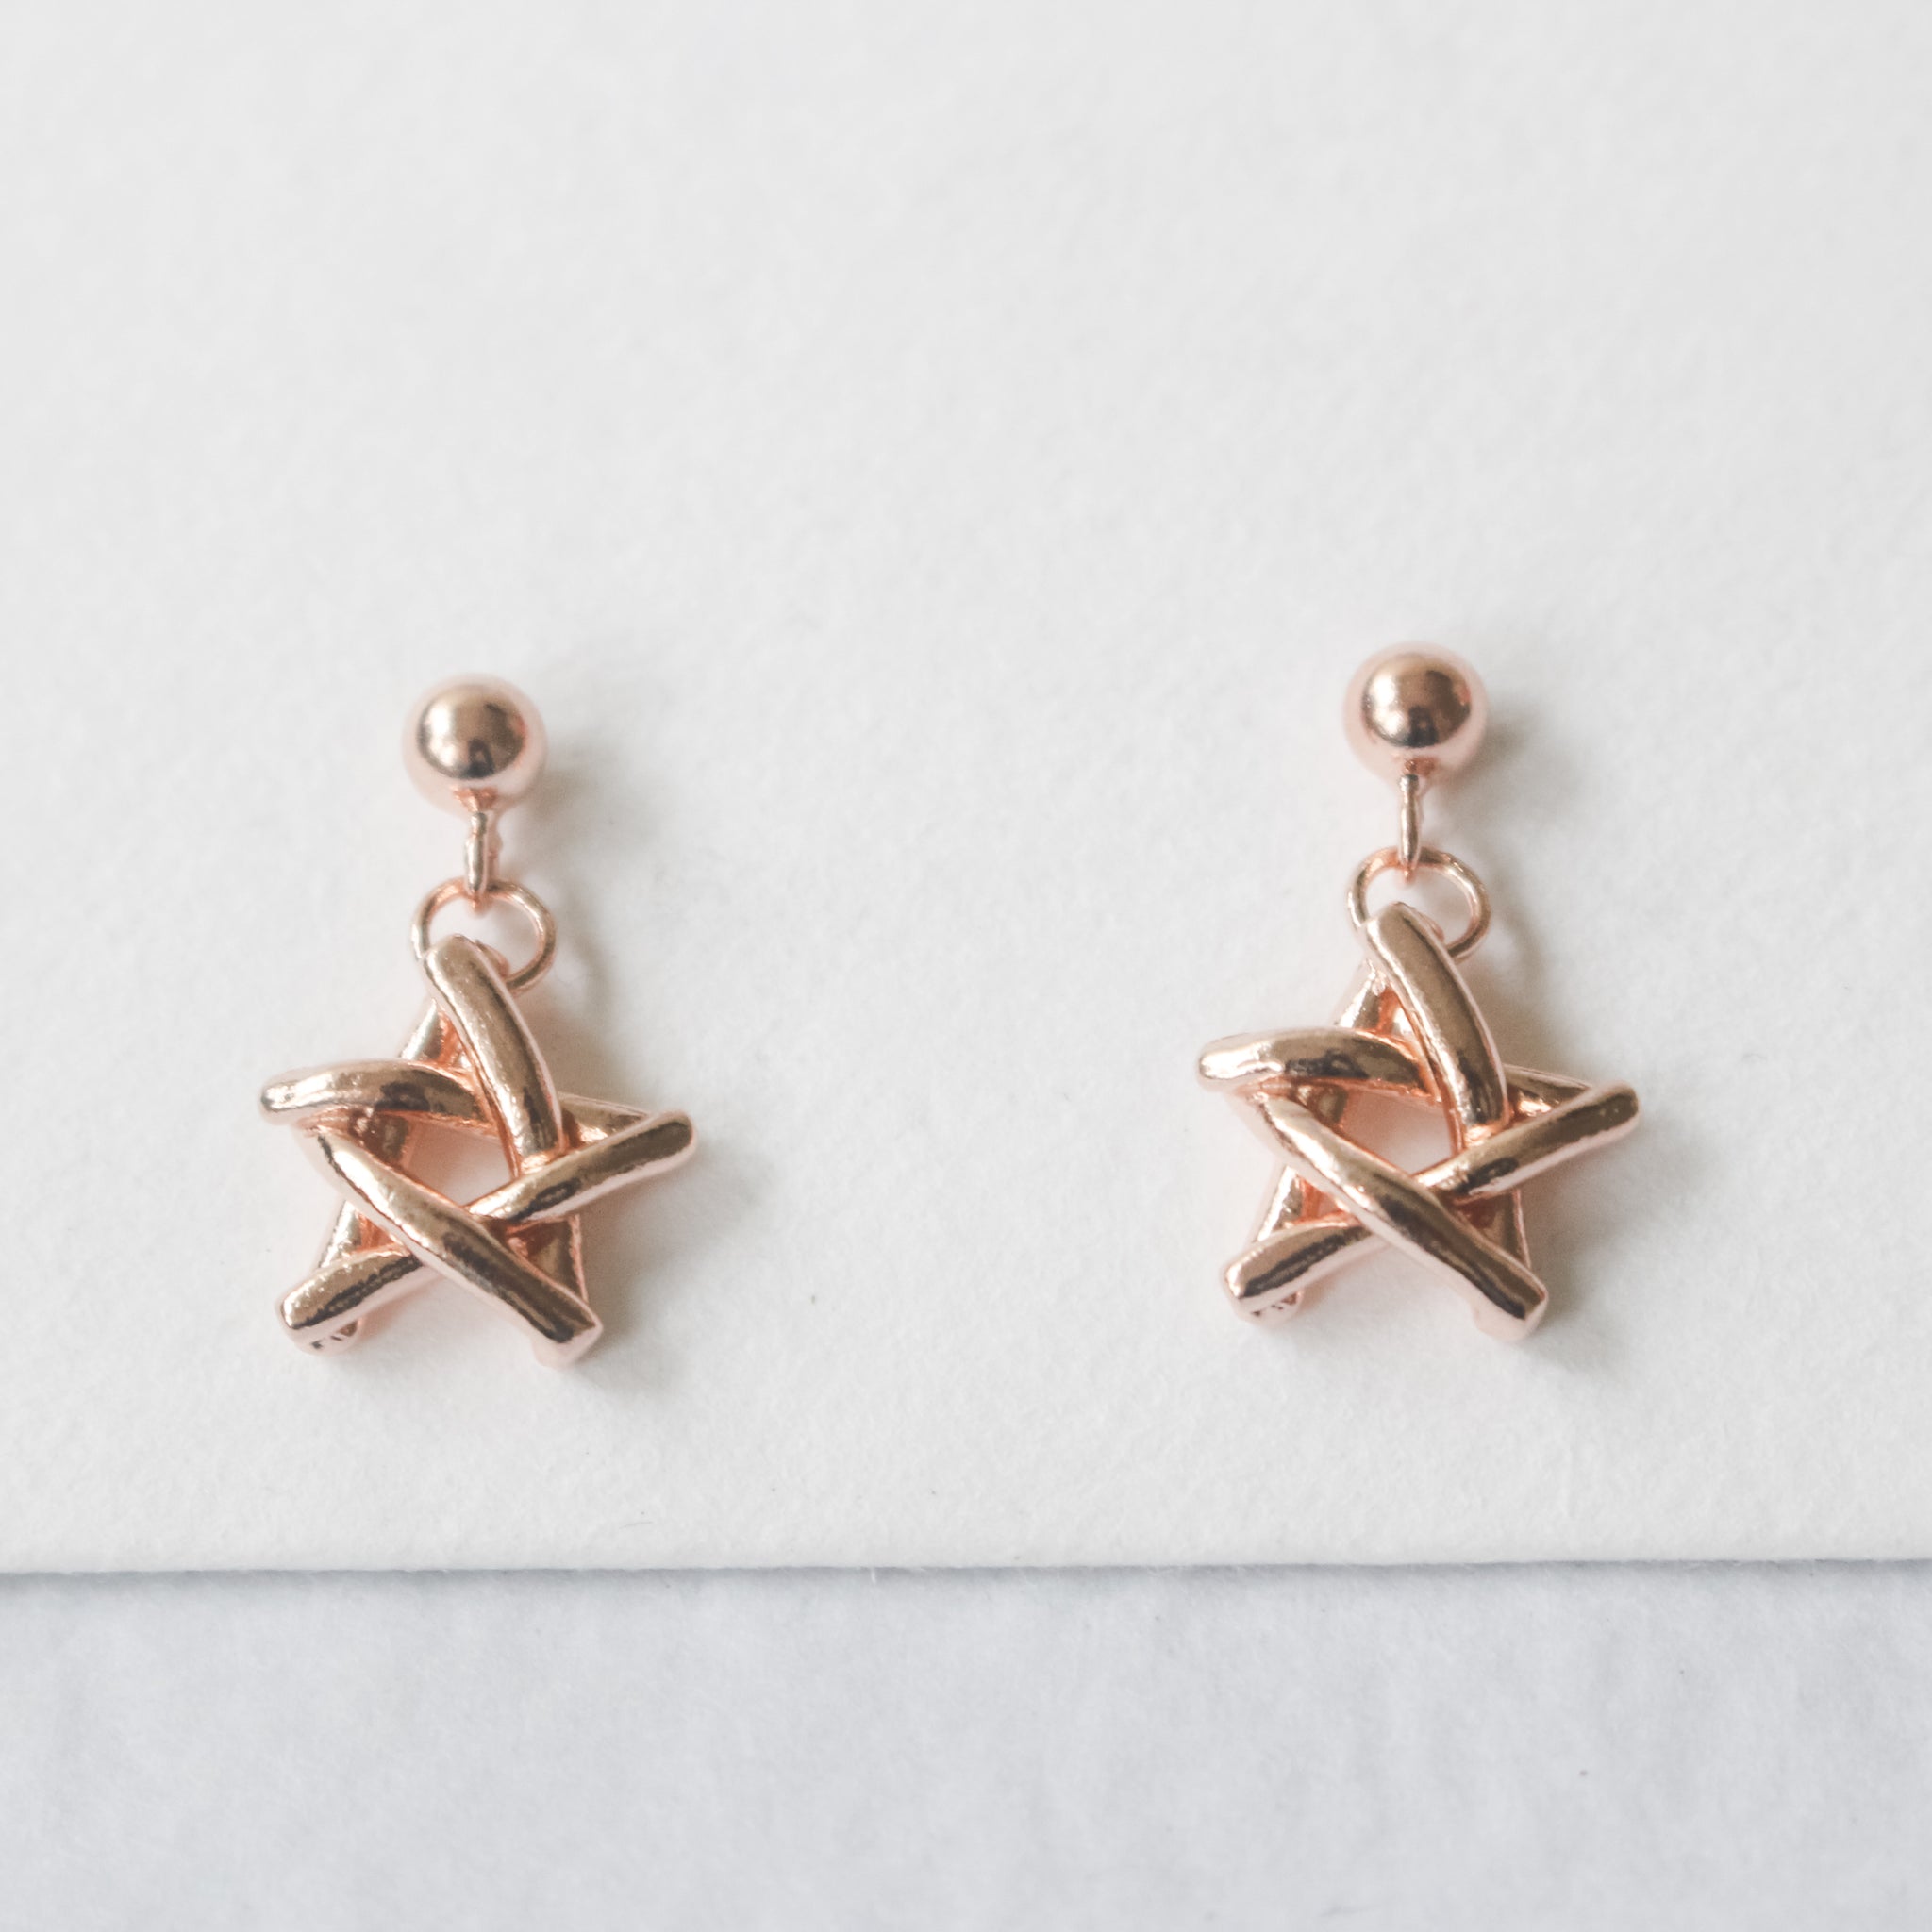 Small Matchstick Star Earrings in Sterling Silver and Rose Gold / Toothpick Star Silver Earrings / Silver Star Earrings/ Christmas Star Earrings